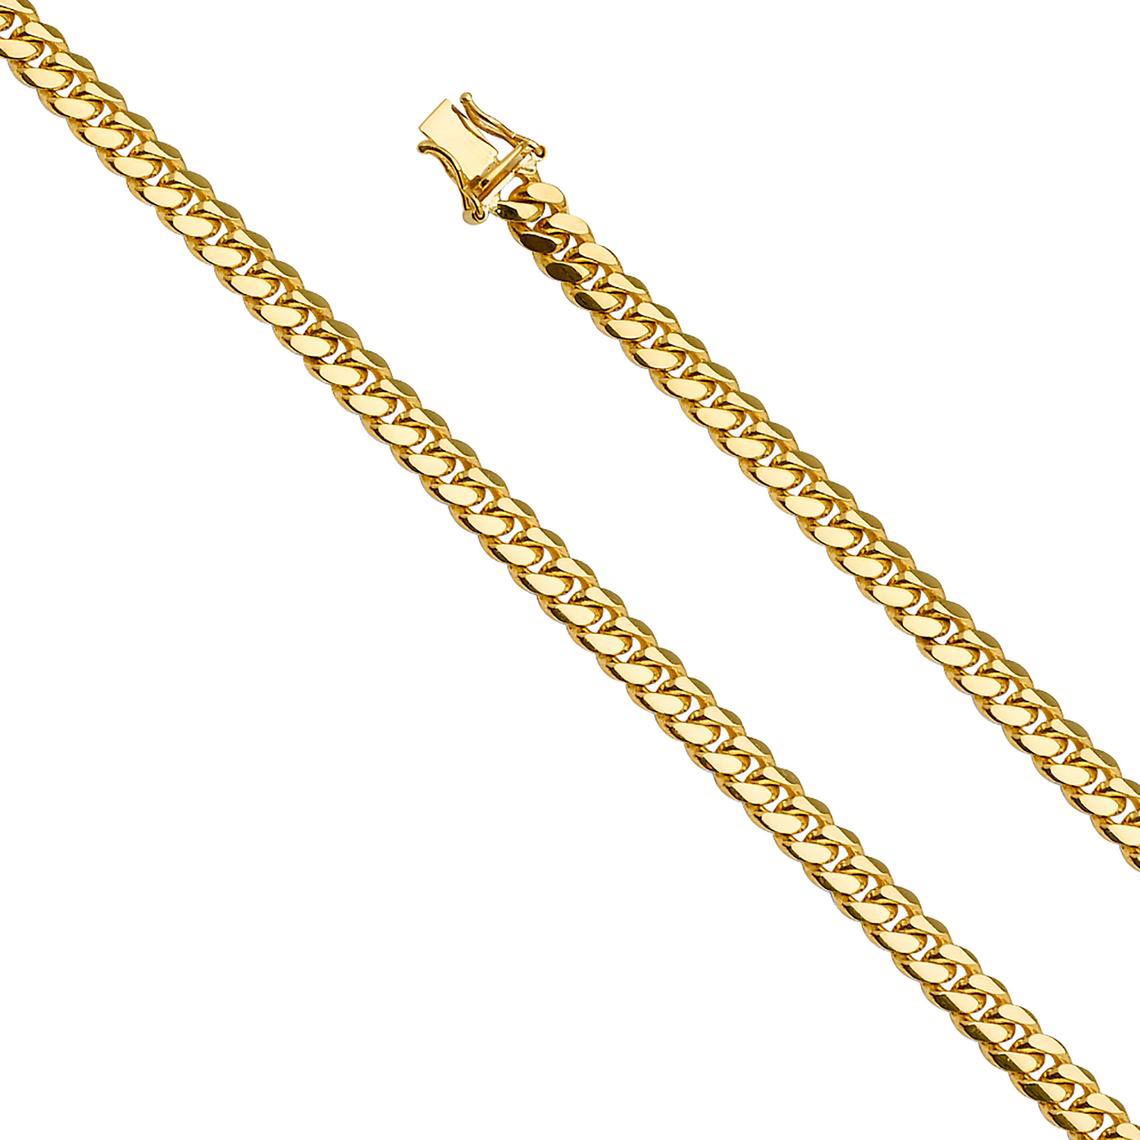 6mm Miami Cuban Link Chain in 18K Gold